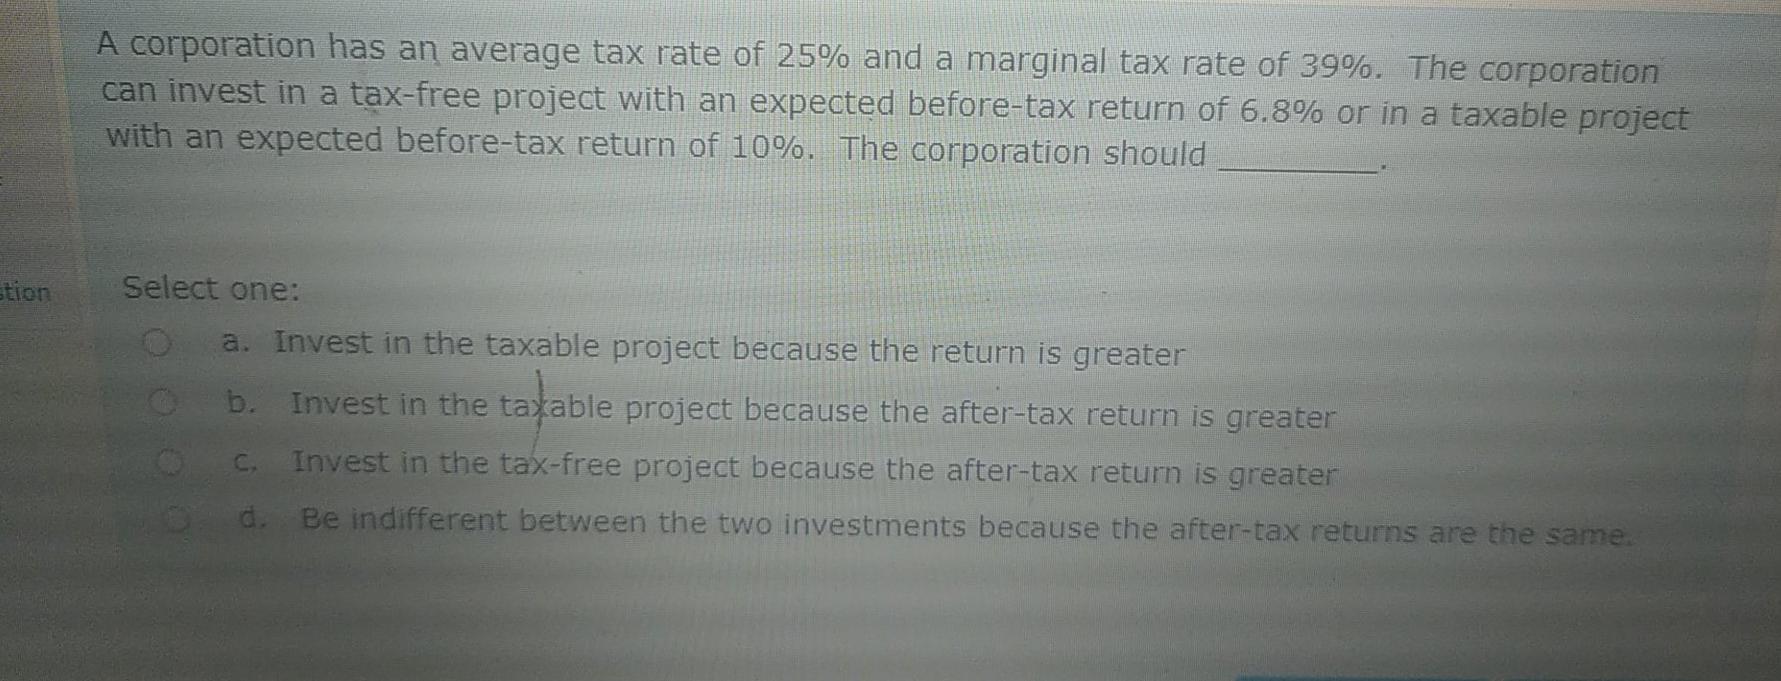 A corporation has an average tax rate of 25% and a marginal tax rate of 39%. The corporation can invest in a tax-free project